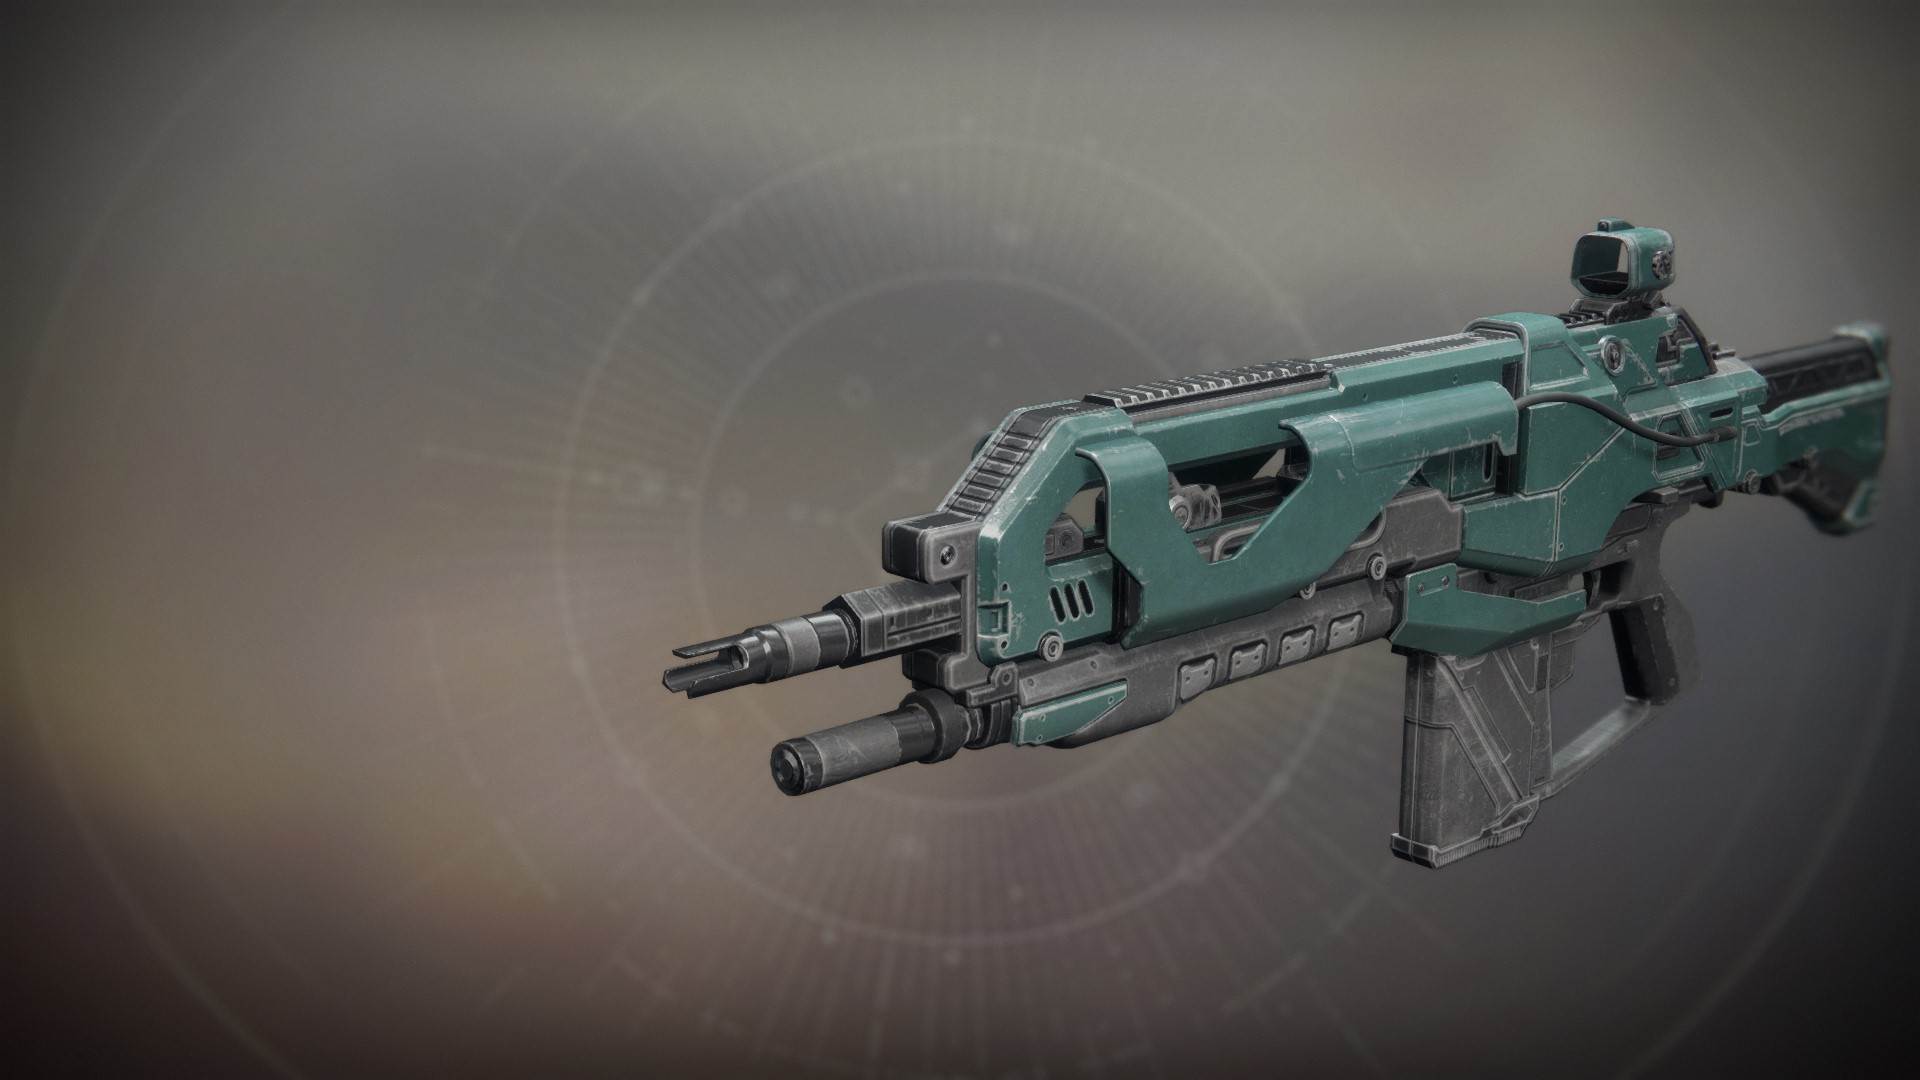 An in-game render of the SUROS Throwback.